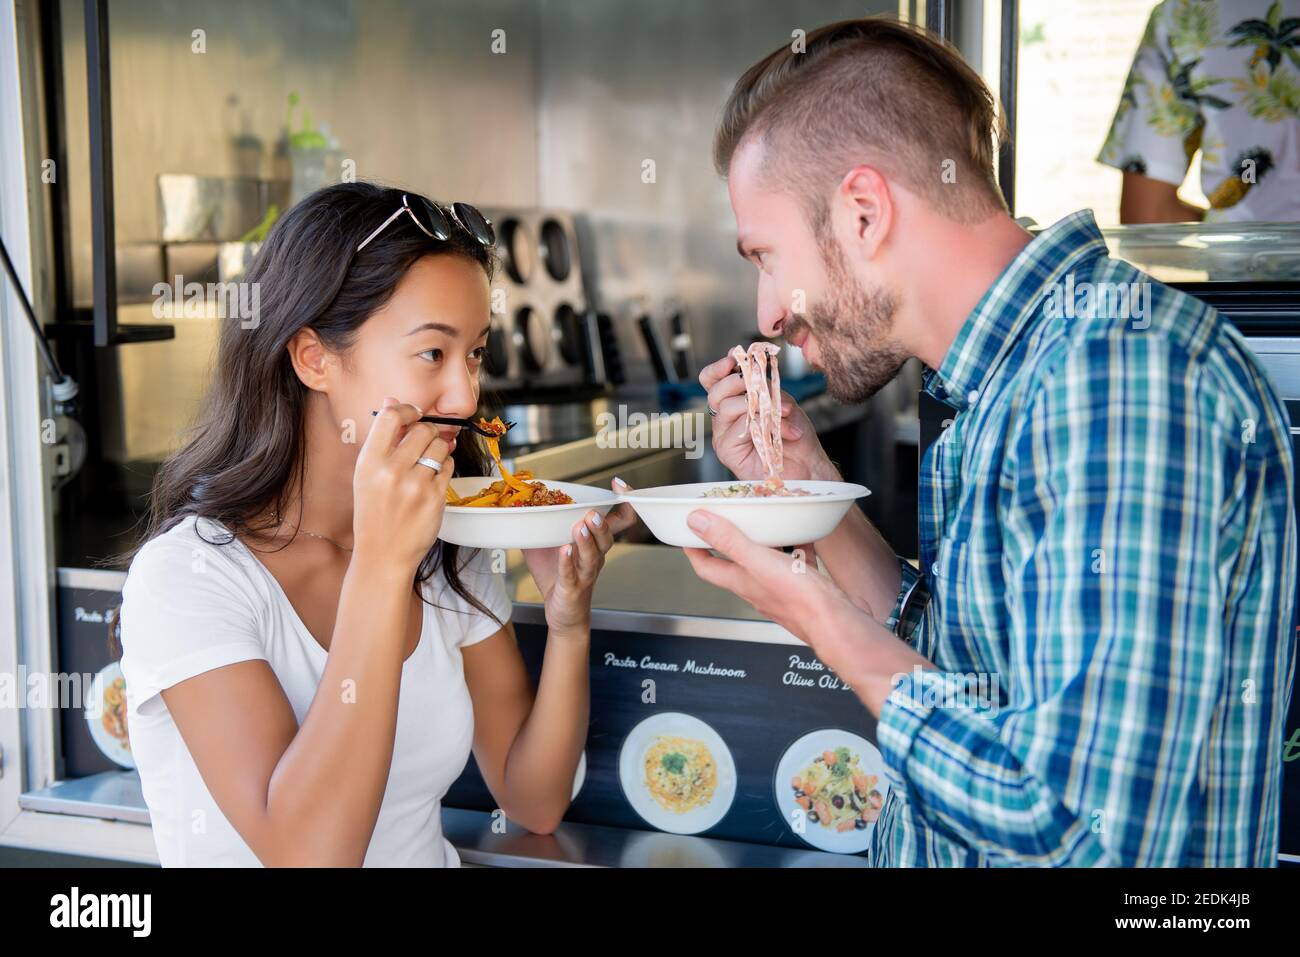 Sweet interracial couple looking in the eyes of each other while eating pasta at food truck Stock Photo